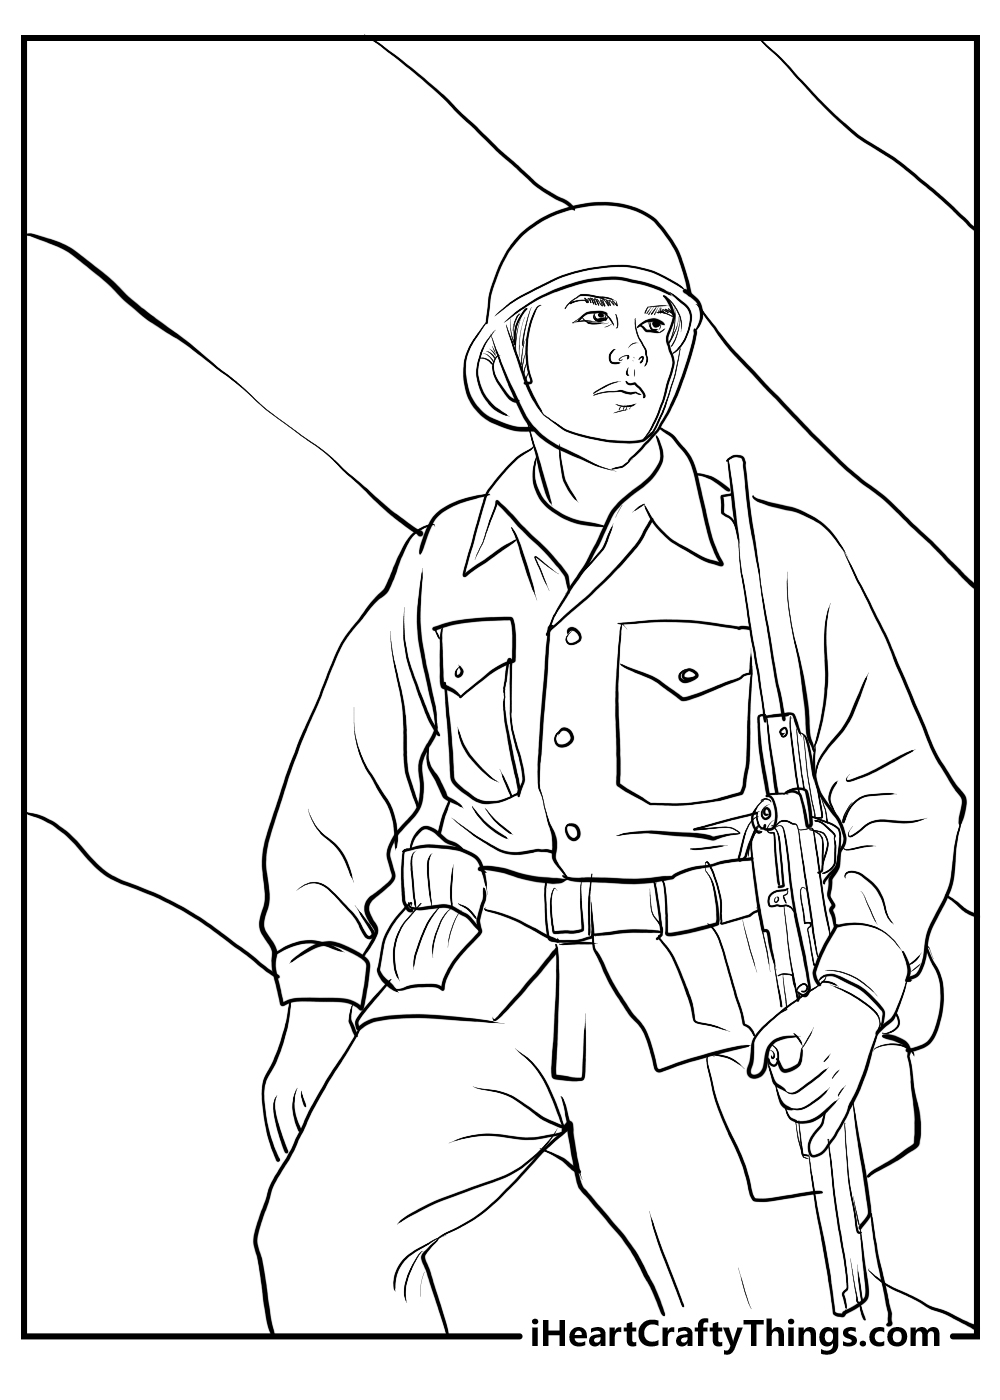 the veteran's day coloring pdf sheets